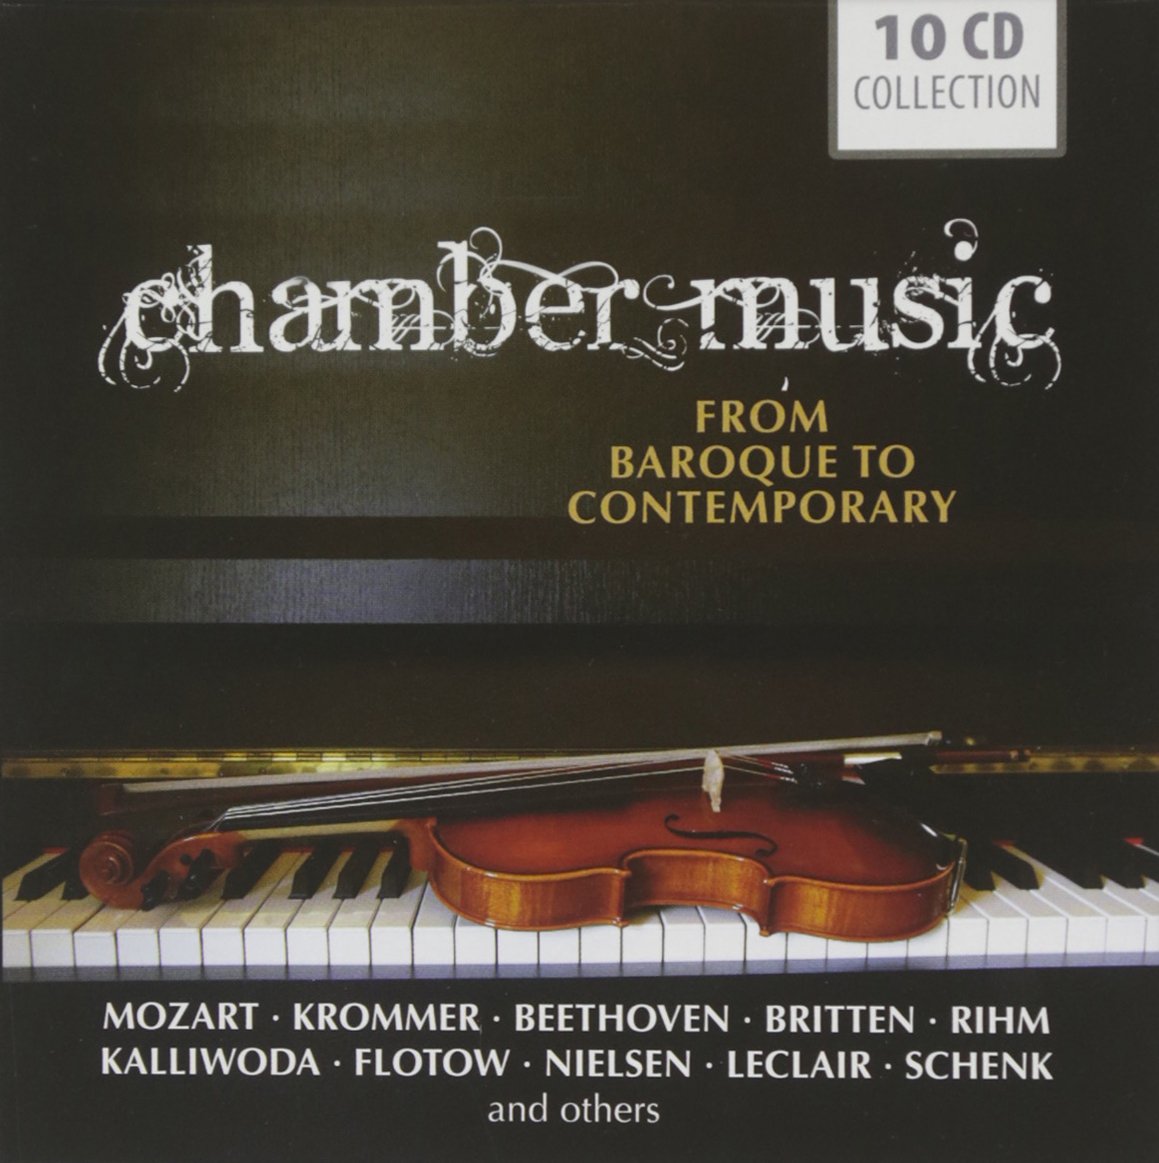 CHAMBER MUSIC FROM BAROQUE TO CONTEMPORARY: Mozart, Krommer, Beethoven (10 CDS)